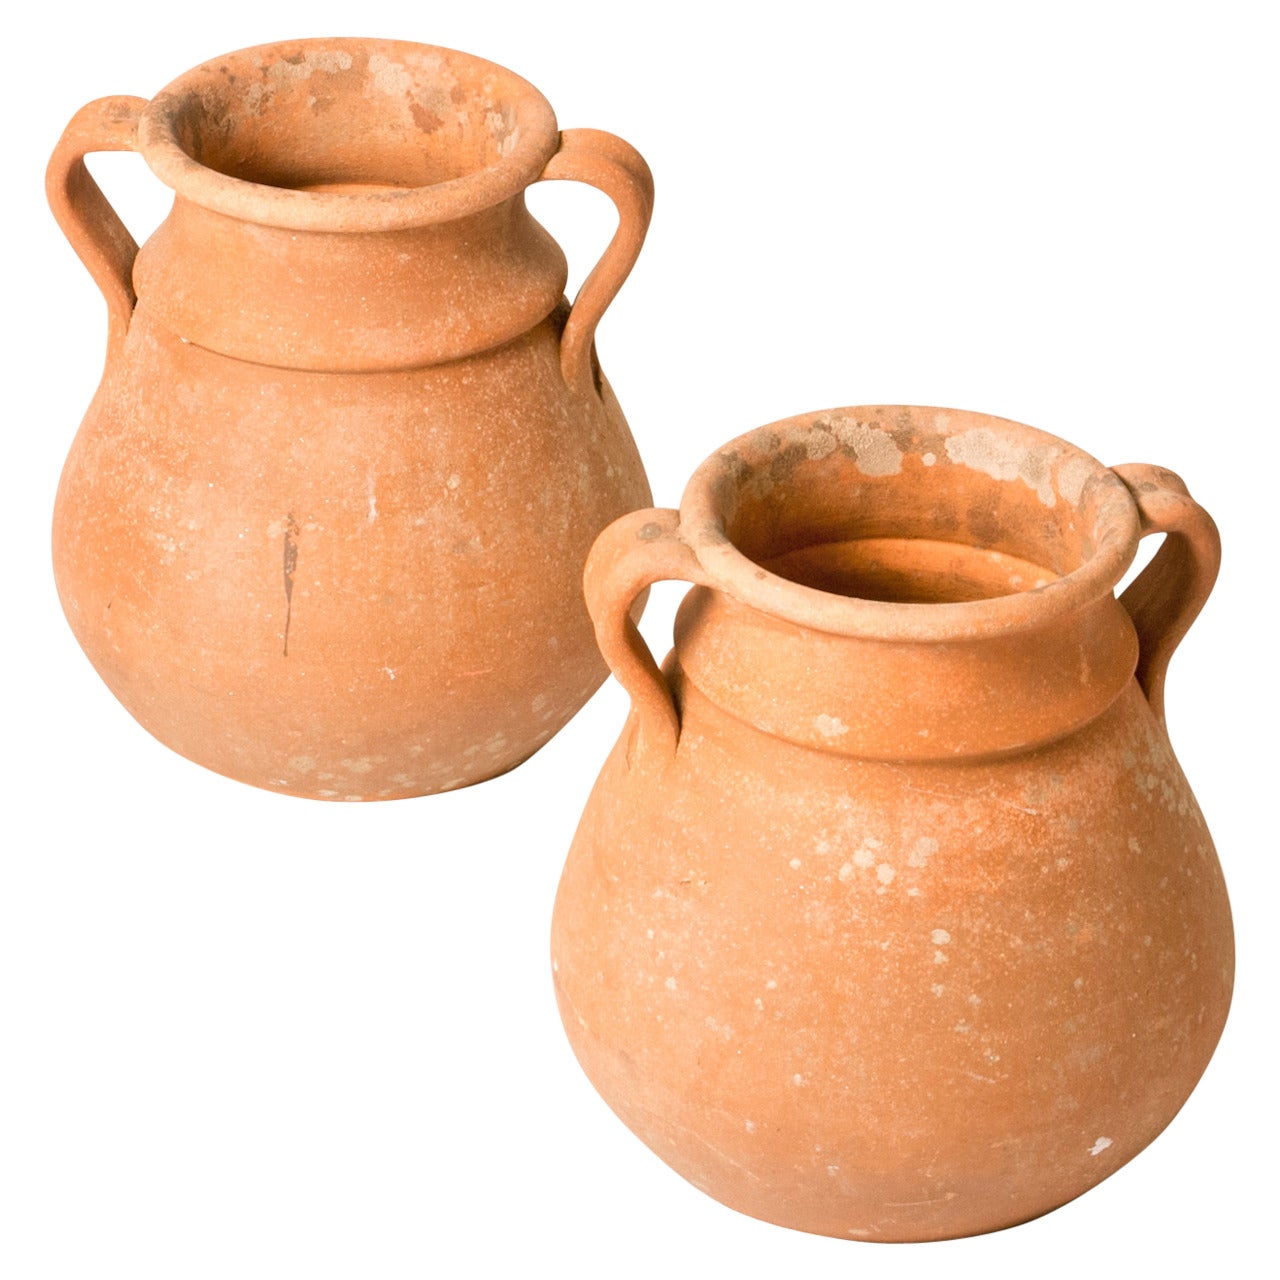 Pair of Early 20th Century Edwardian Terra Cotta Pots from England